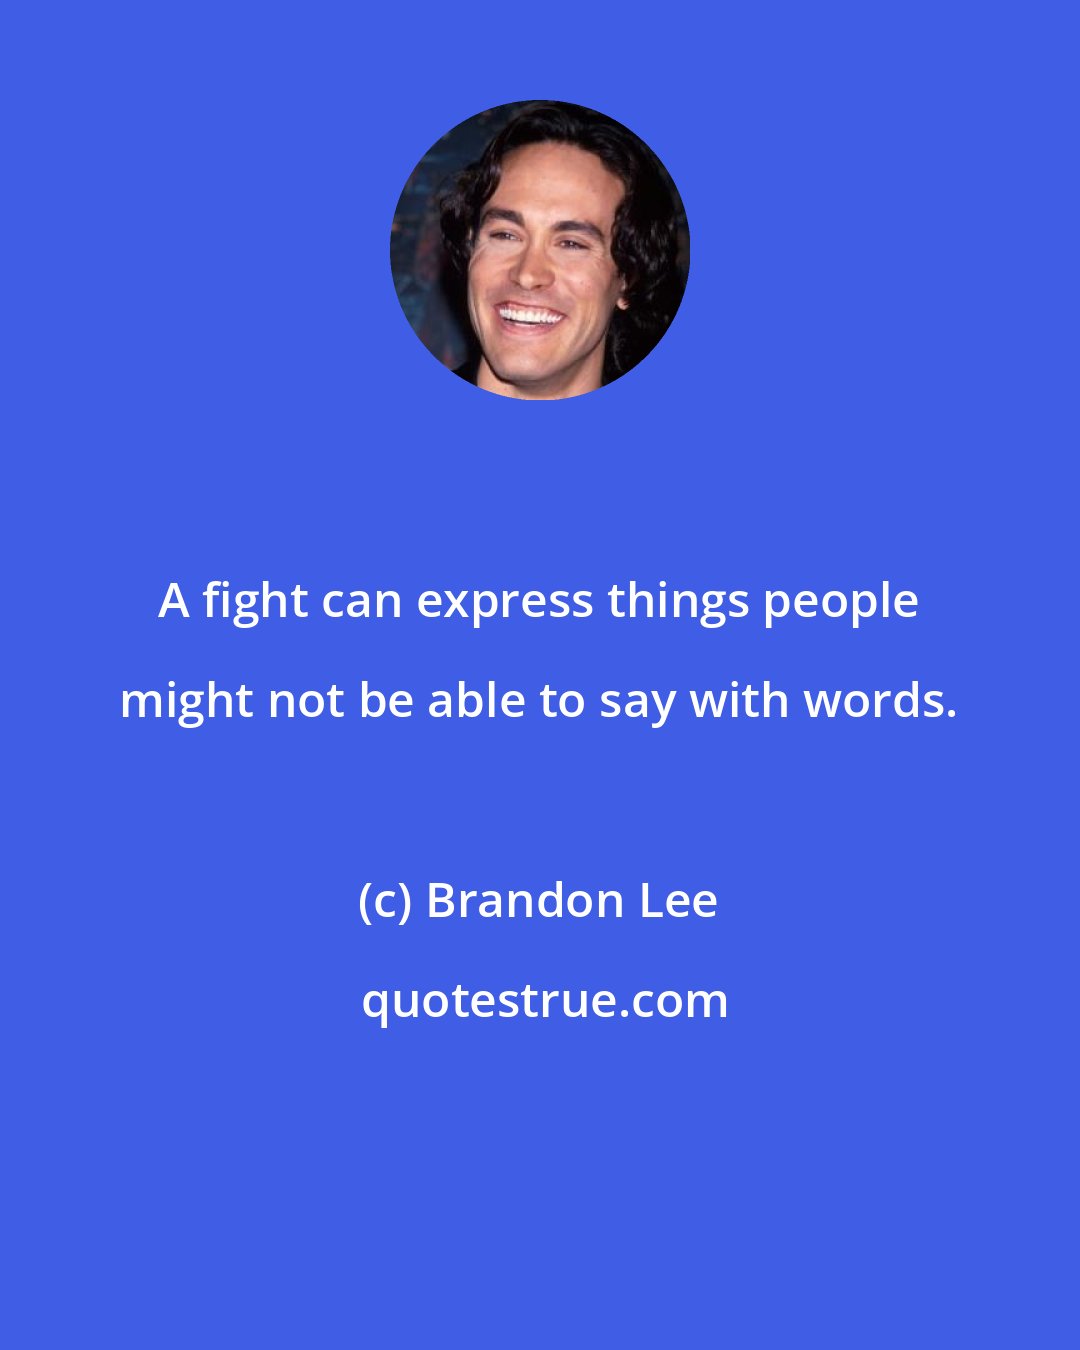 Brandon Lee: A fight can express things people might not be able to say with words.